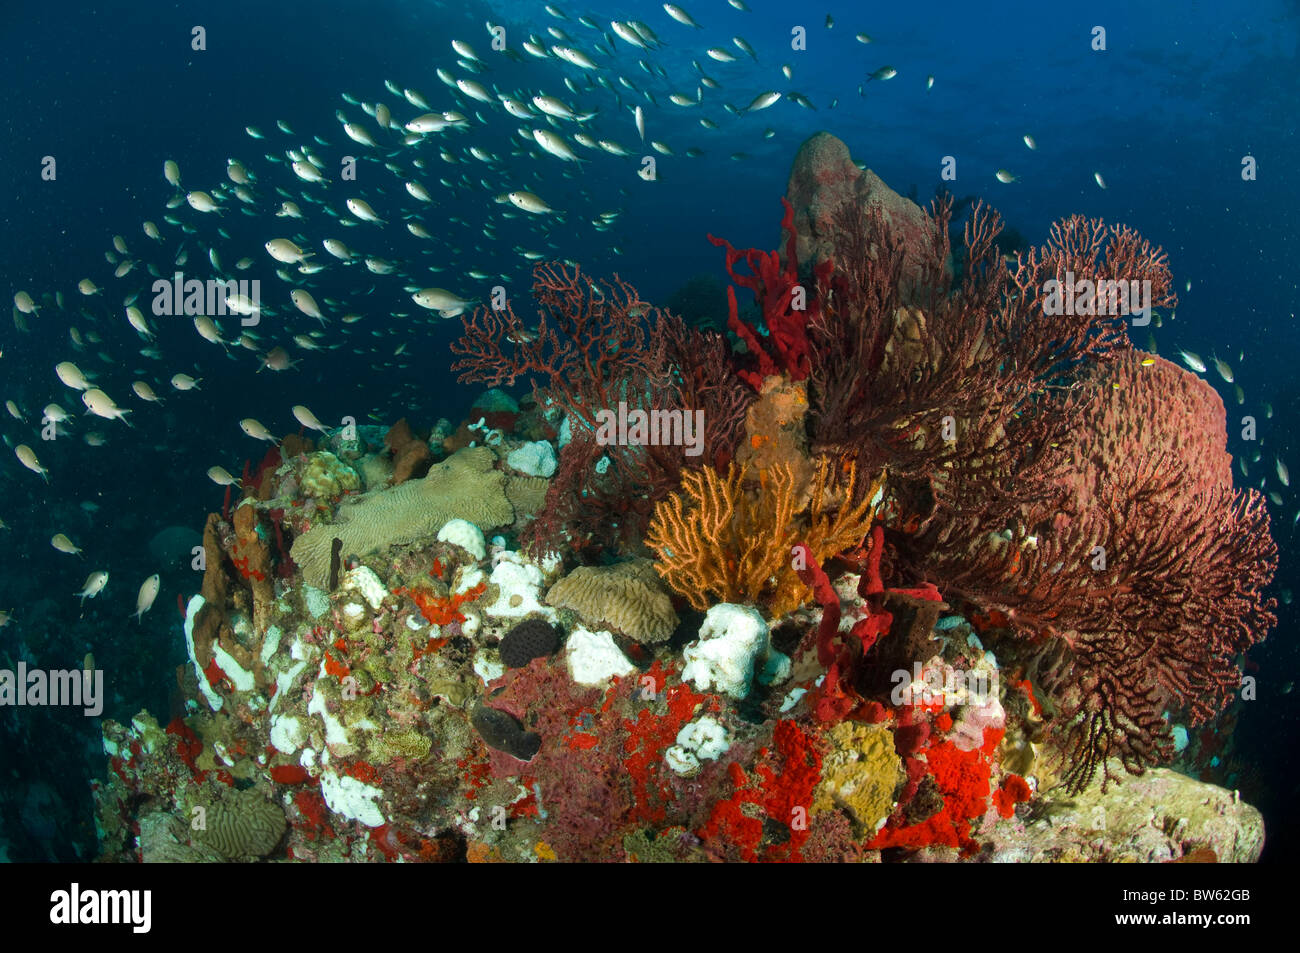 Coral-reef scape St Lucian seascape Stock Photo